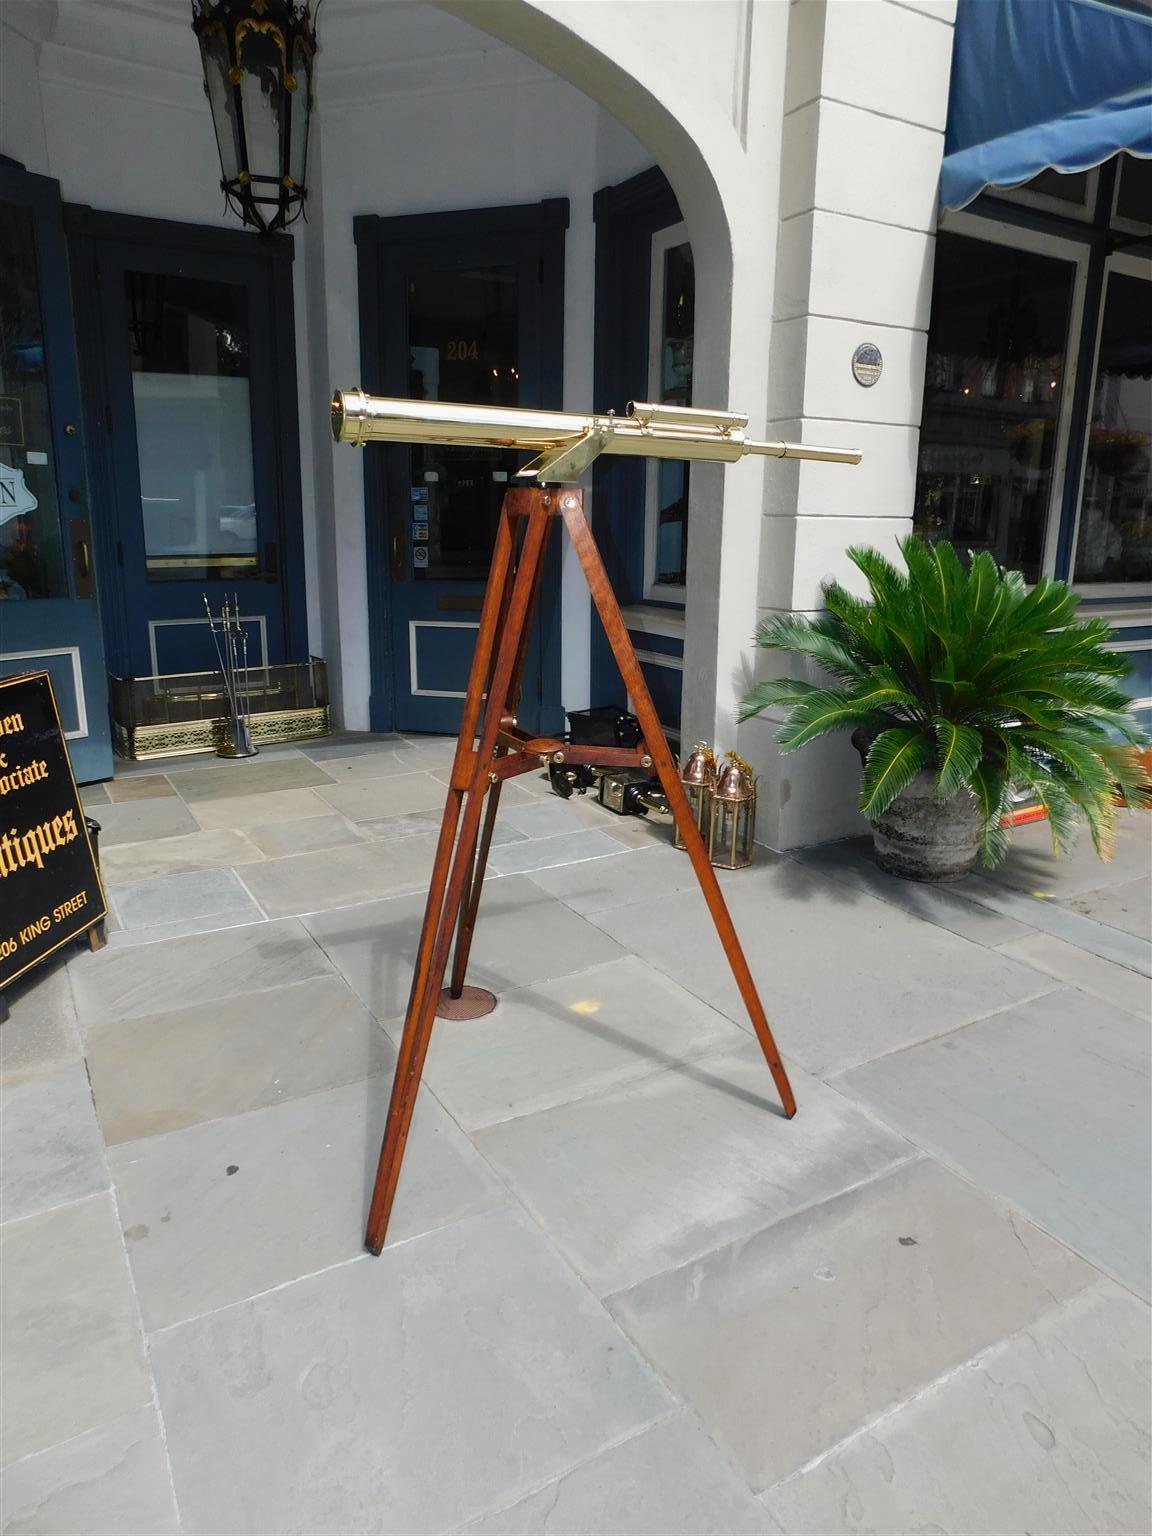 English brass telescope on adjustable oak tripod stand. Telescope retains the original glass lens, upper side sight, and lens cover. Telescope is all original and in working condition. Tripod legs are 41